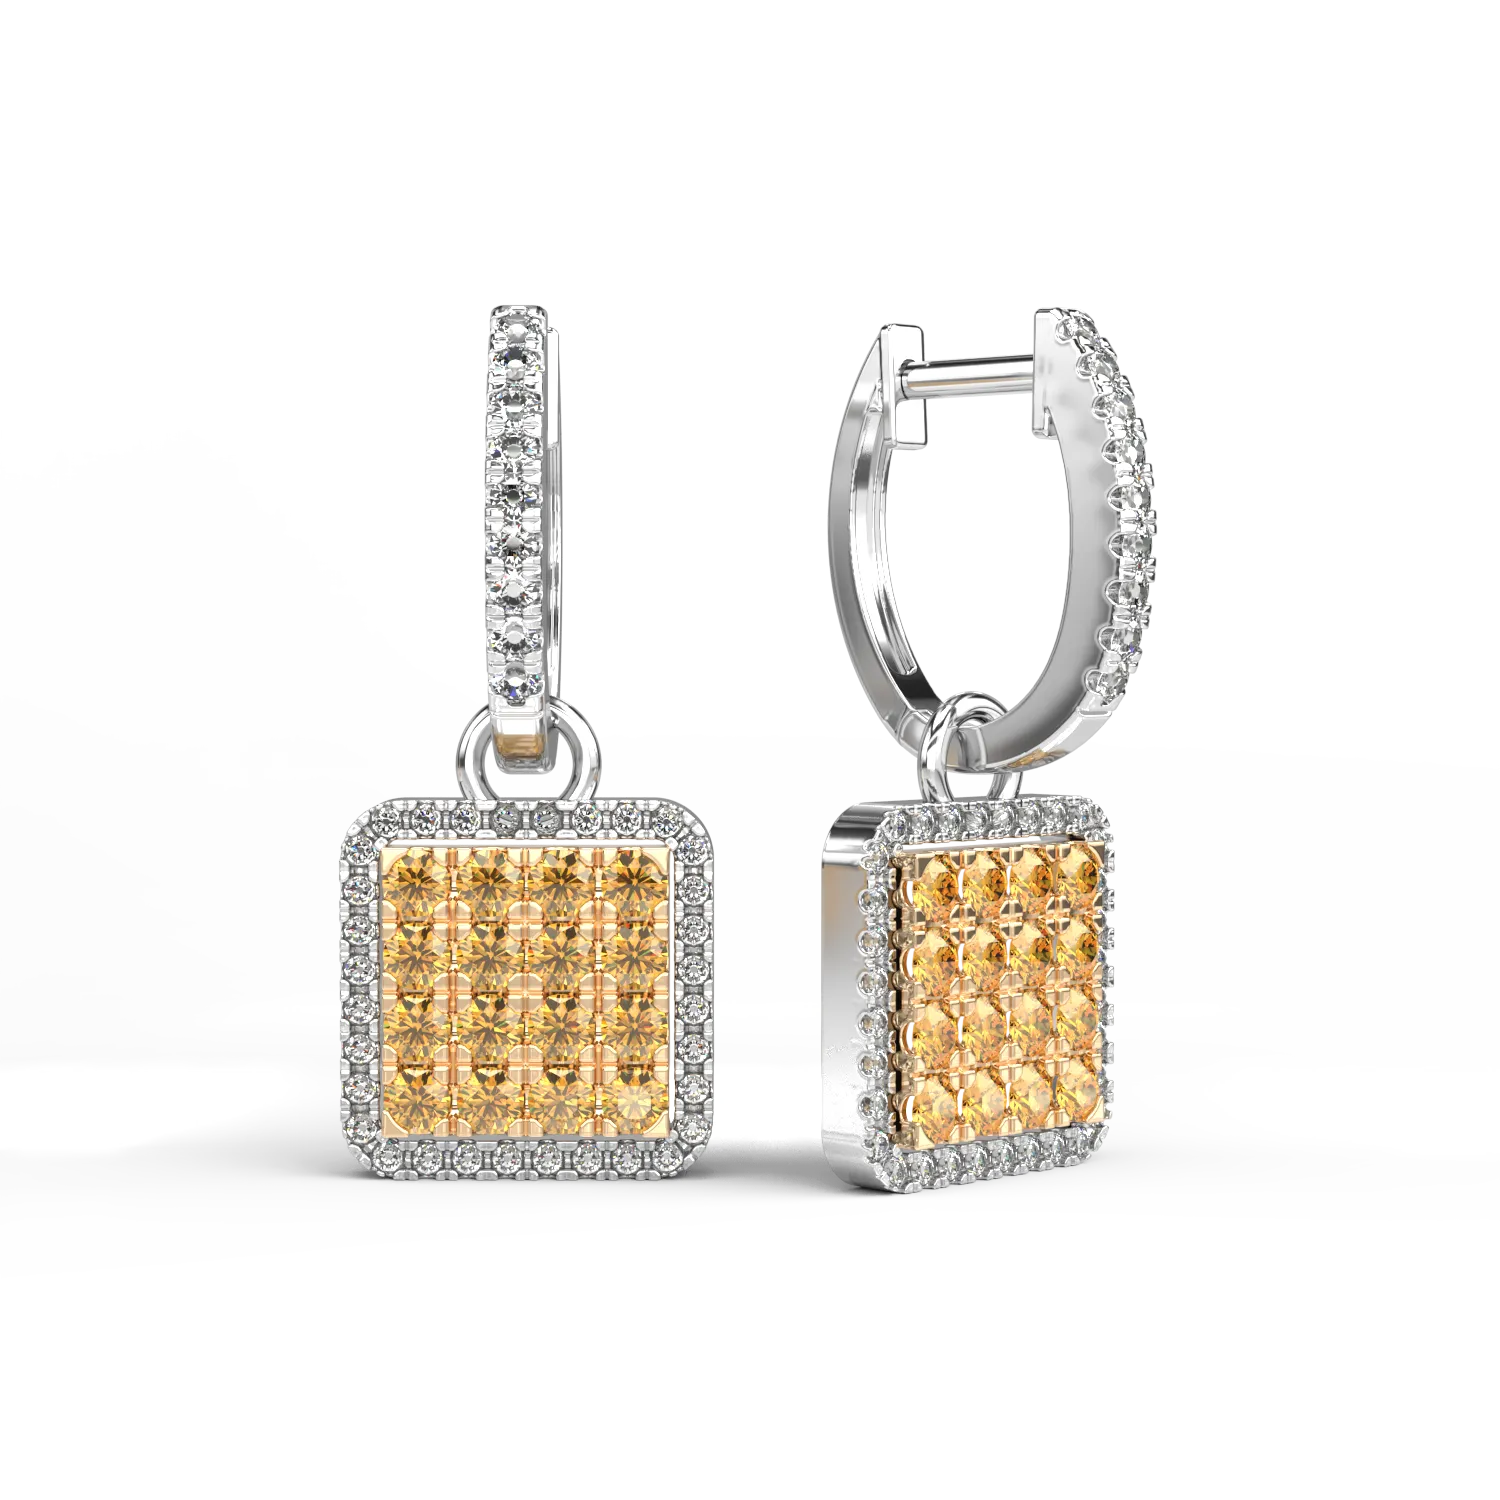 18K white-yellow gold earrings with 0.81ct yellow sapphires and 0.41ct diamonds